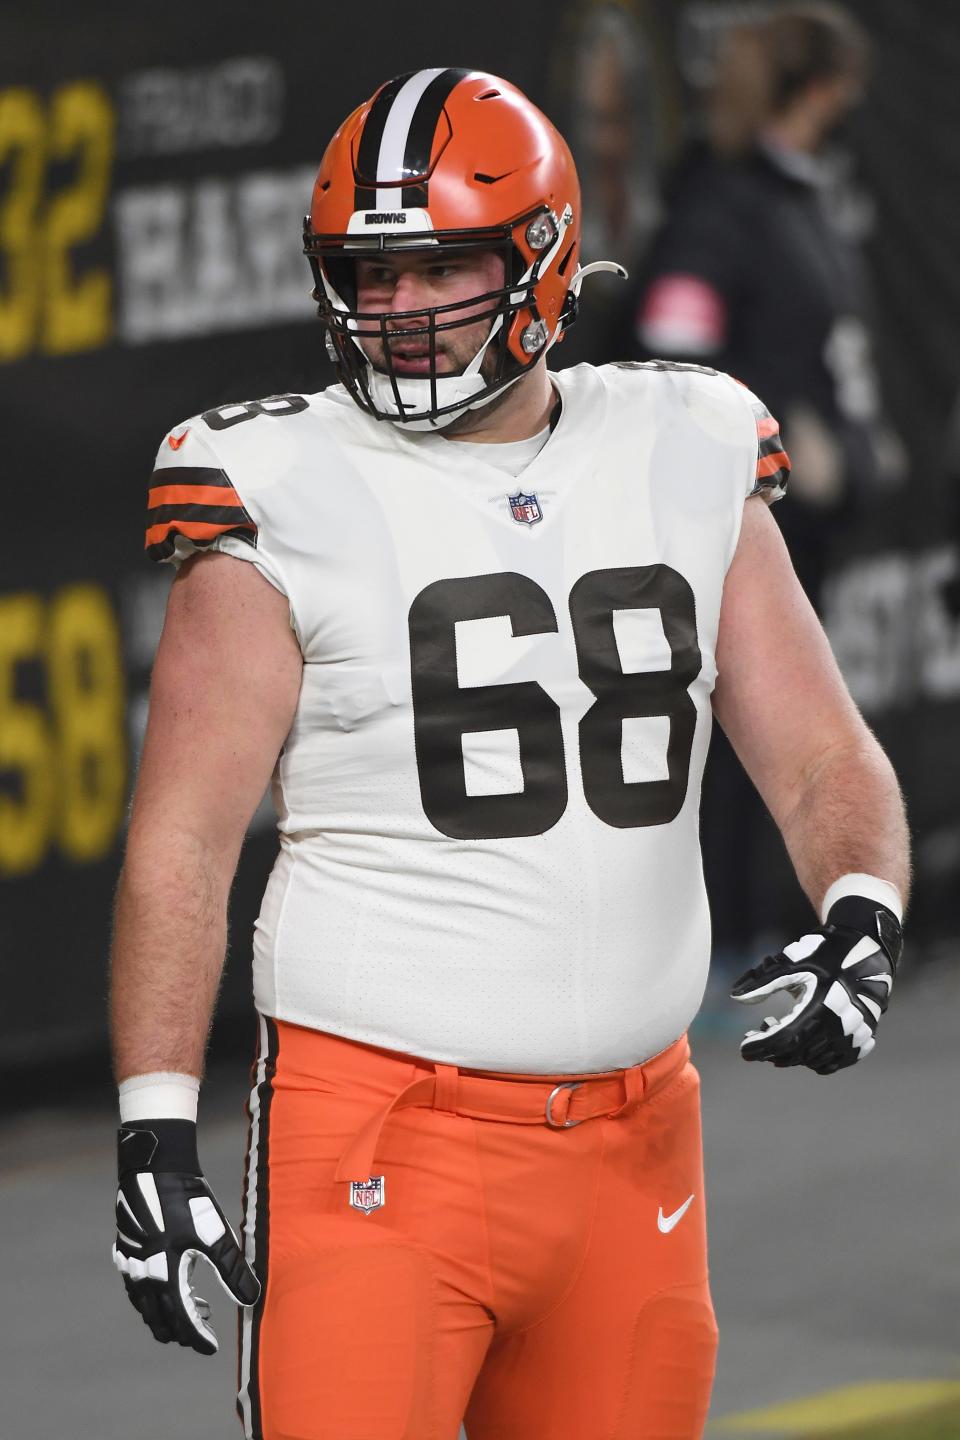 Browns offensive lineman Michael Dunn (68) warms up before an AFC wild-card playoff game against the Steelers, Sunday, Jan. 10, 2021, in Pittsburgh. (AP Photo/Justin Berl)